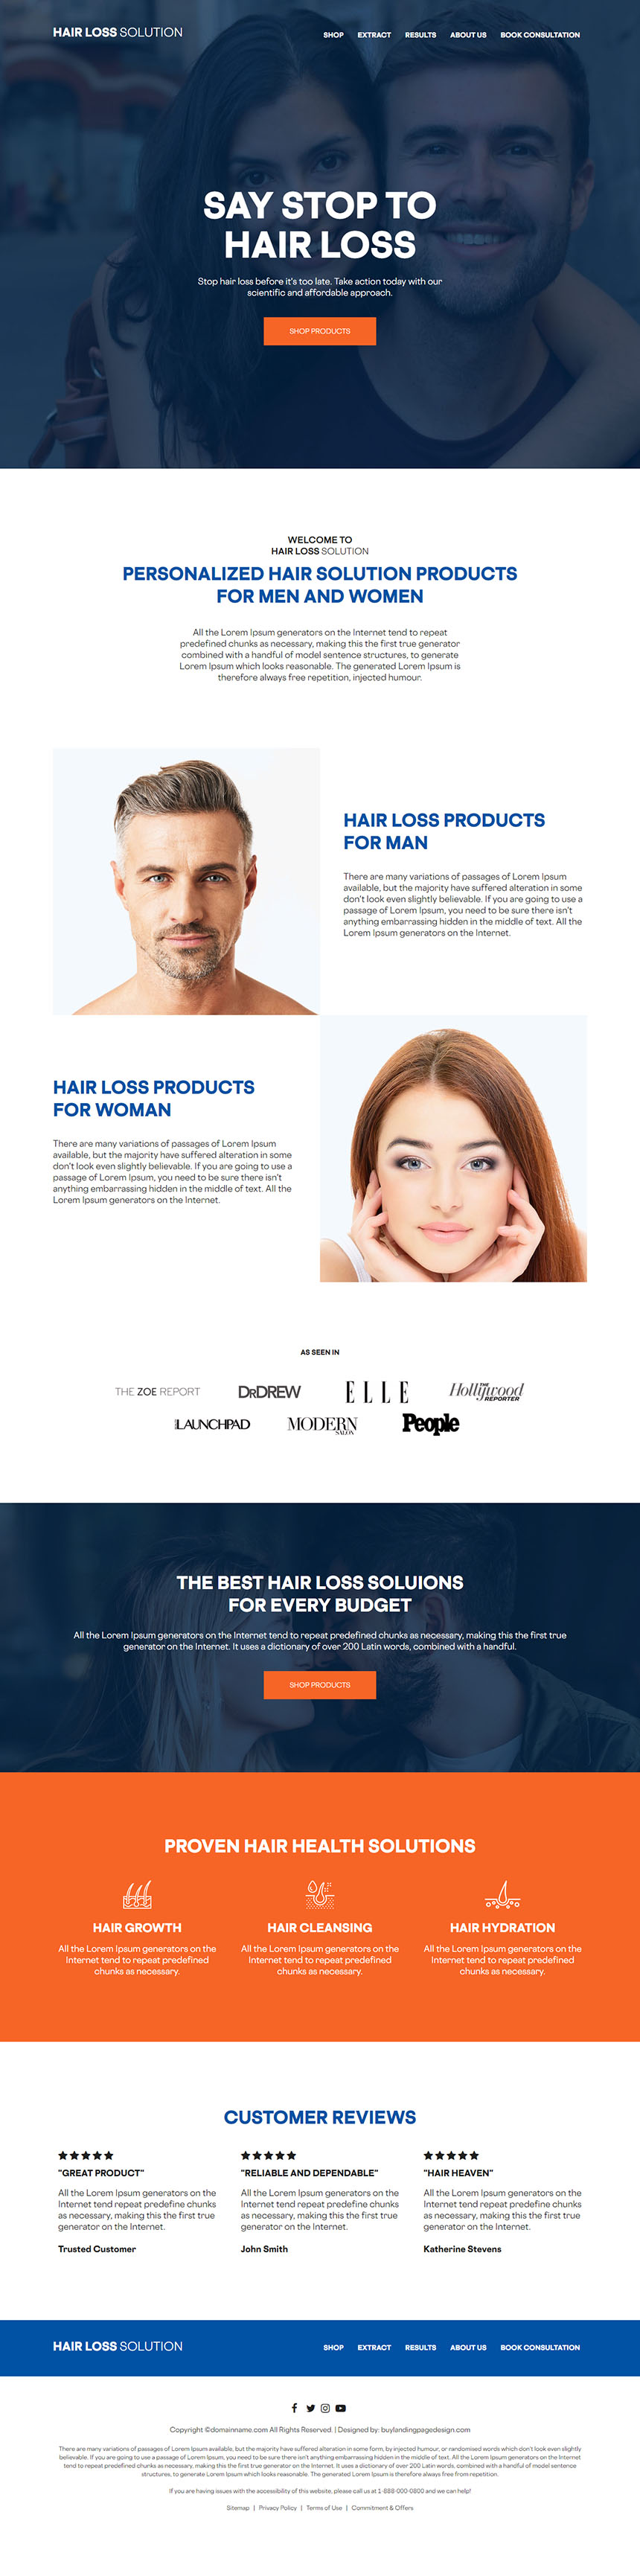 hair loss solution product responsive website design